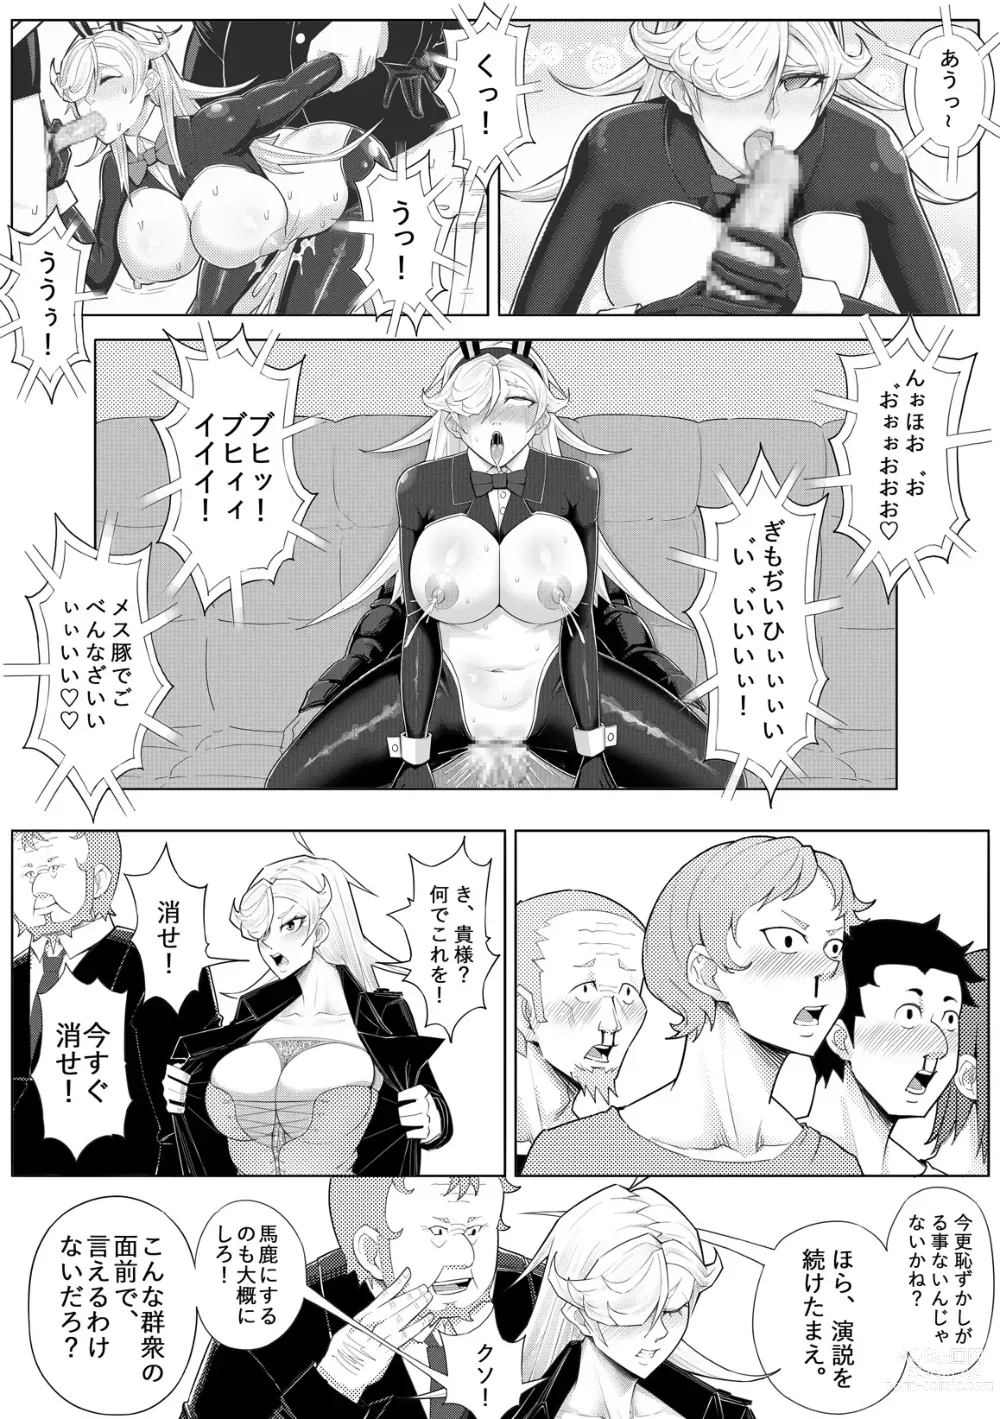 Page 25 of doujinshi Skin Normal Mission 04